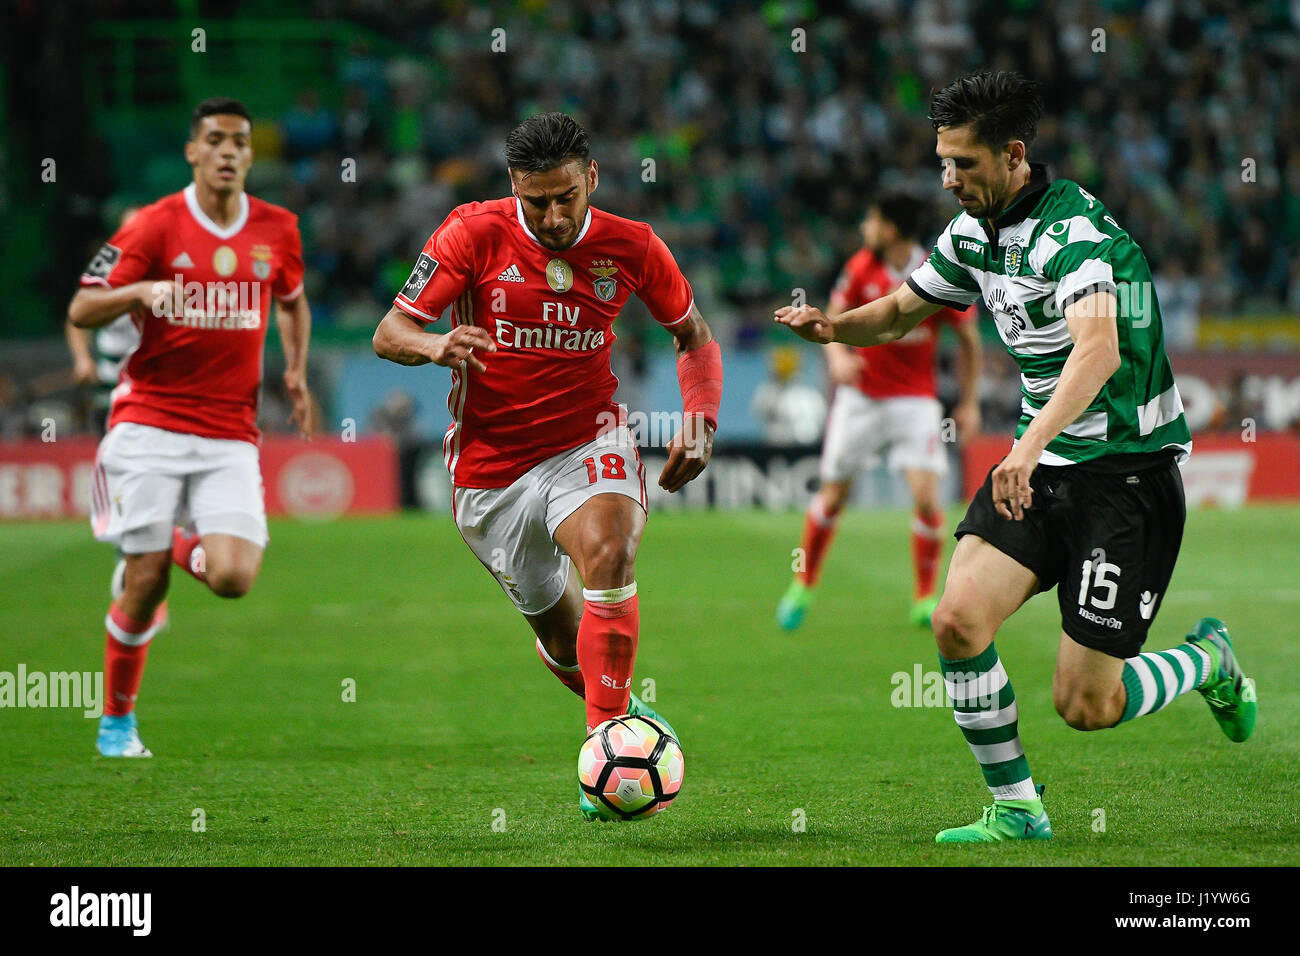 Portugal, Lisbon, April 22, 2017 - FOOTBALL: SPORTING CP x SL BENFICA - Eduardo Salvio #18 Benfica midfielder from Argentina and Paulo Oliveira #15 Sporting defender from Portugal in action during Portuguese First League football match between Sporting CP and SL Benfica in Alvalade Stadium on April 22, 2017 in Lisbon, Portugal. Photo: Bruno de Carvalho/Alamy Live News Stock Photo